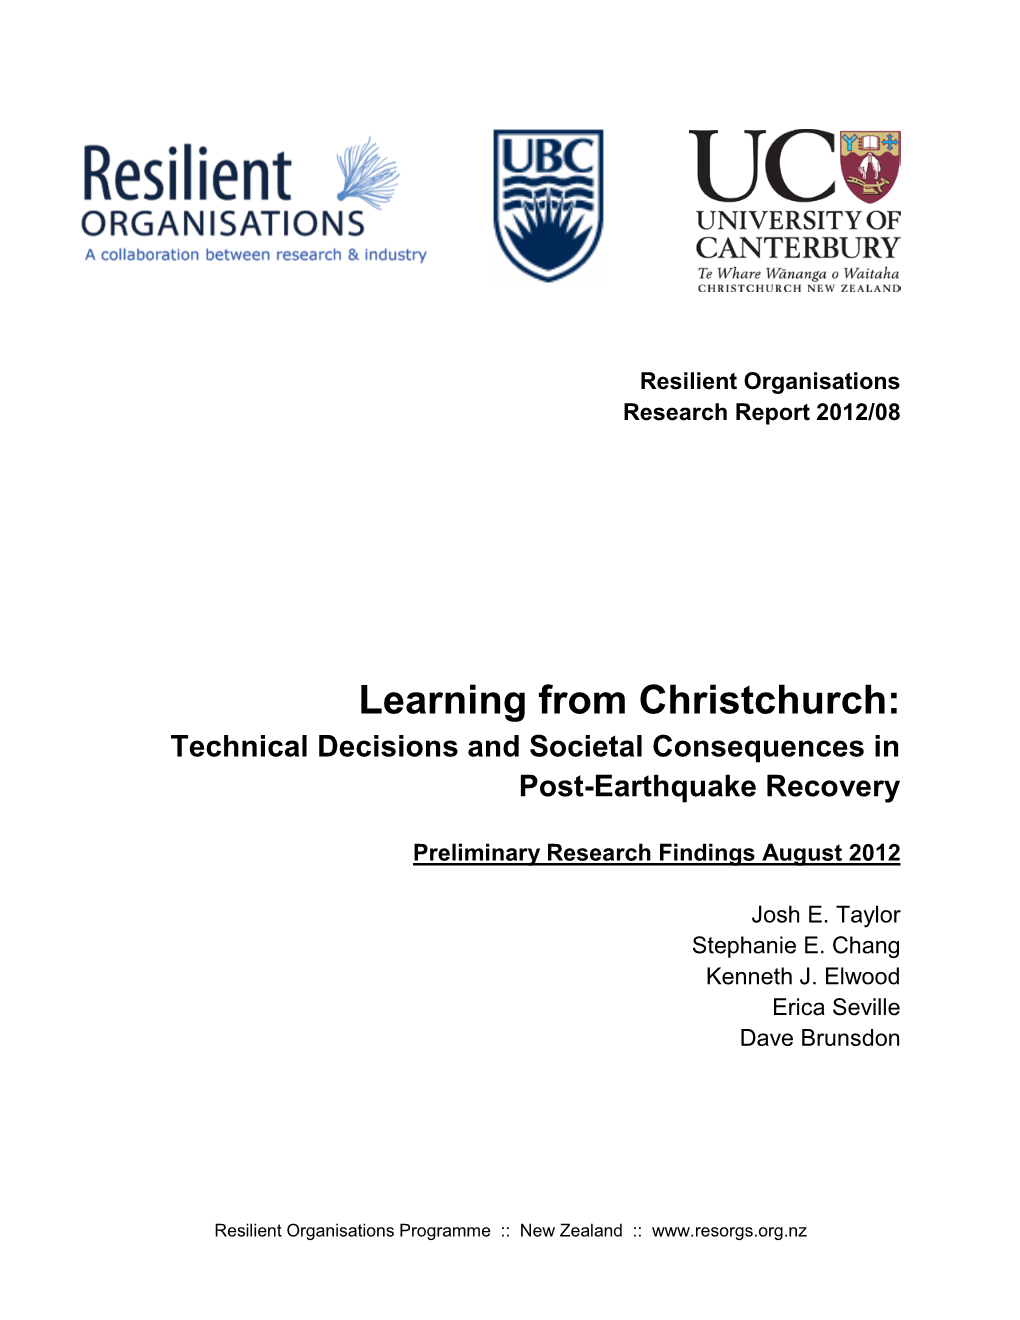 Learning from Christchurch: Technical Decisions and Societal Consequences in Post-Earthquake Recovery